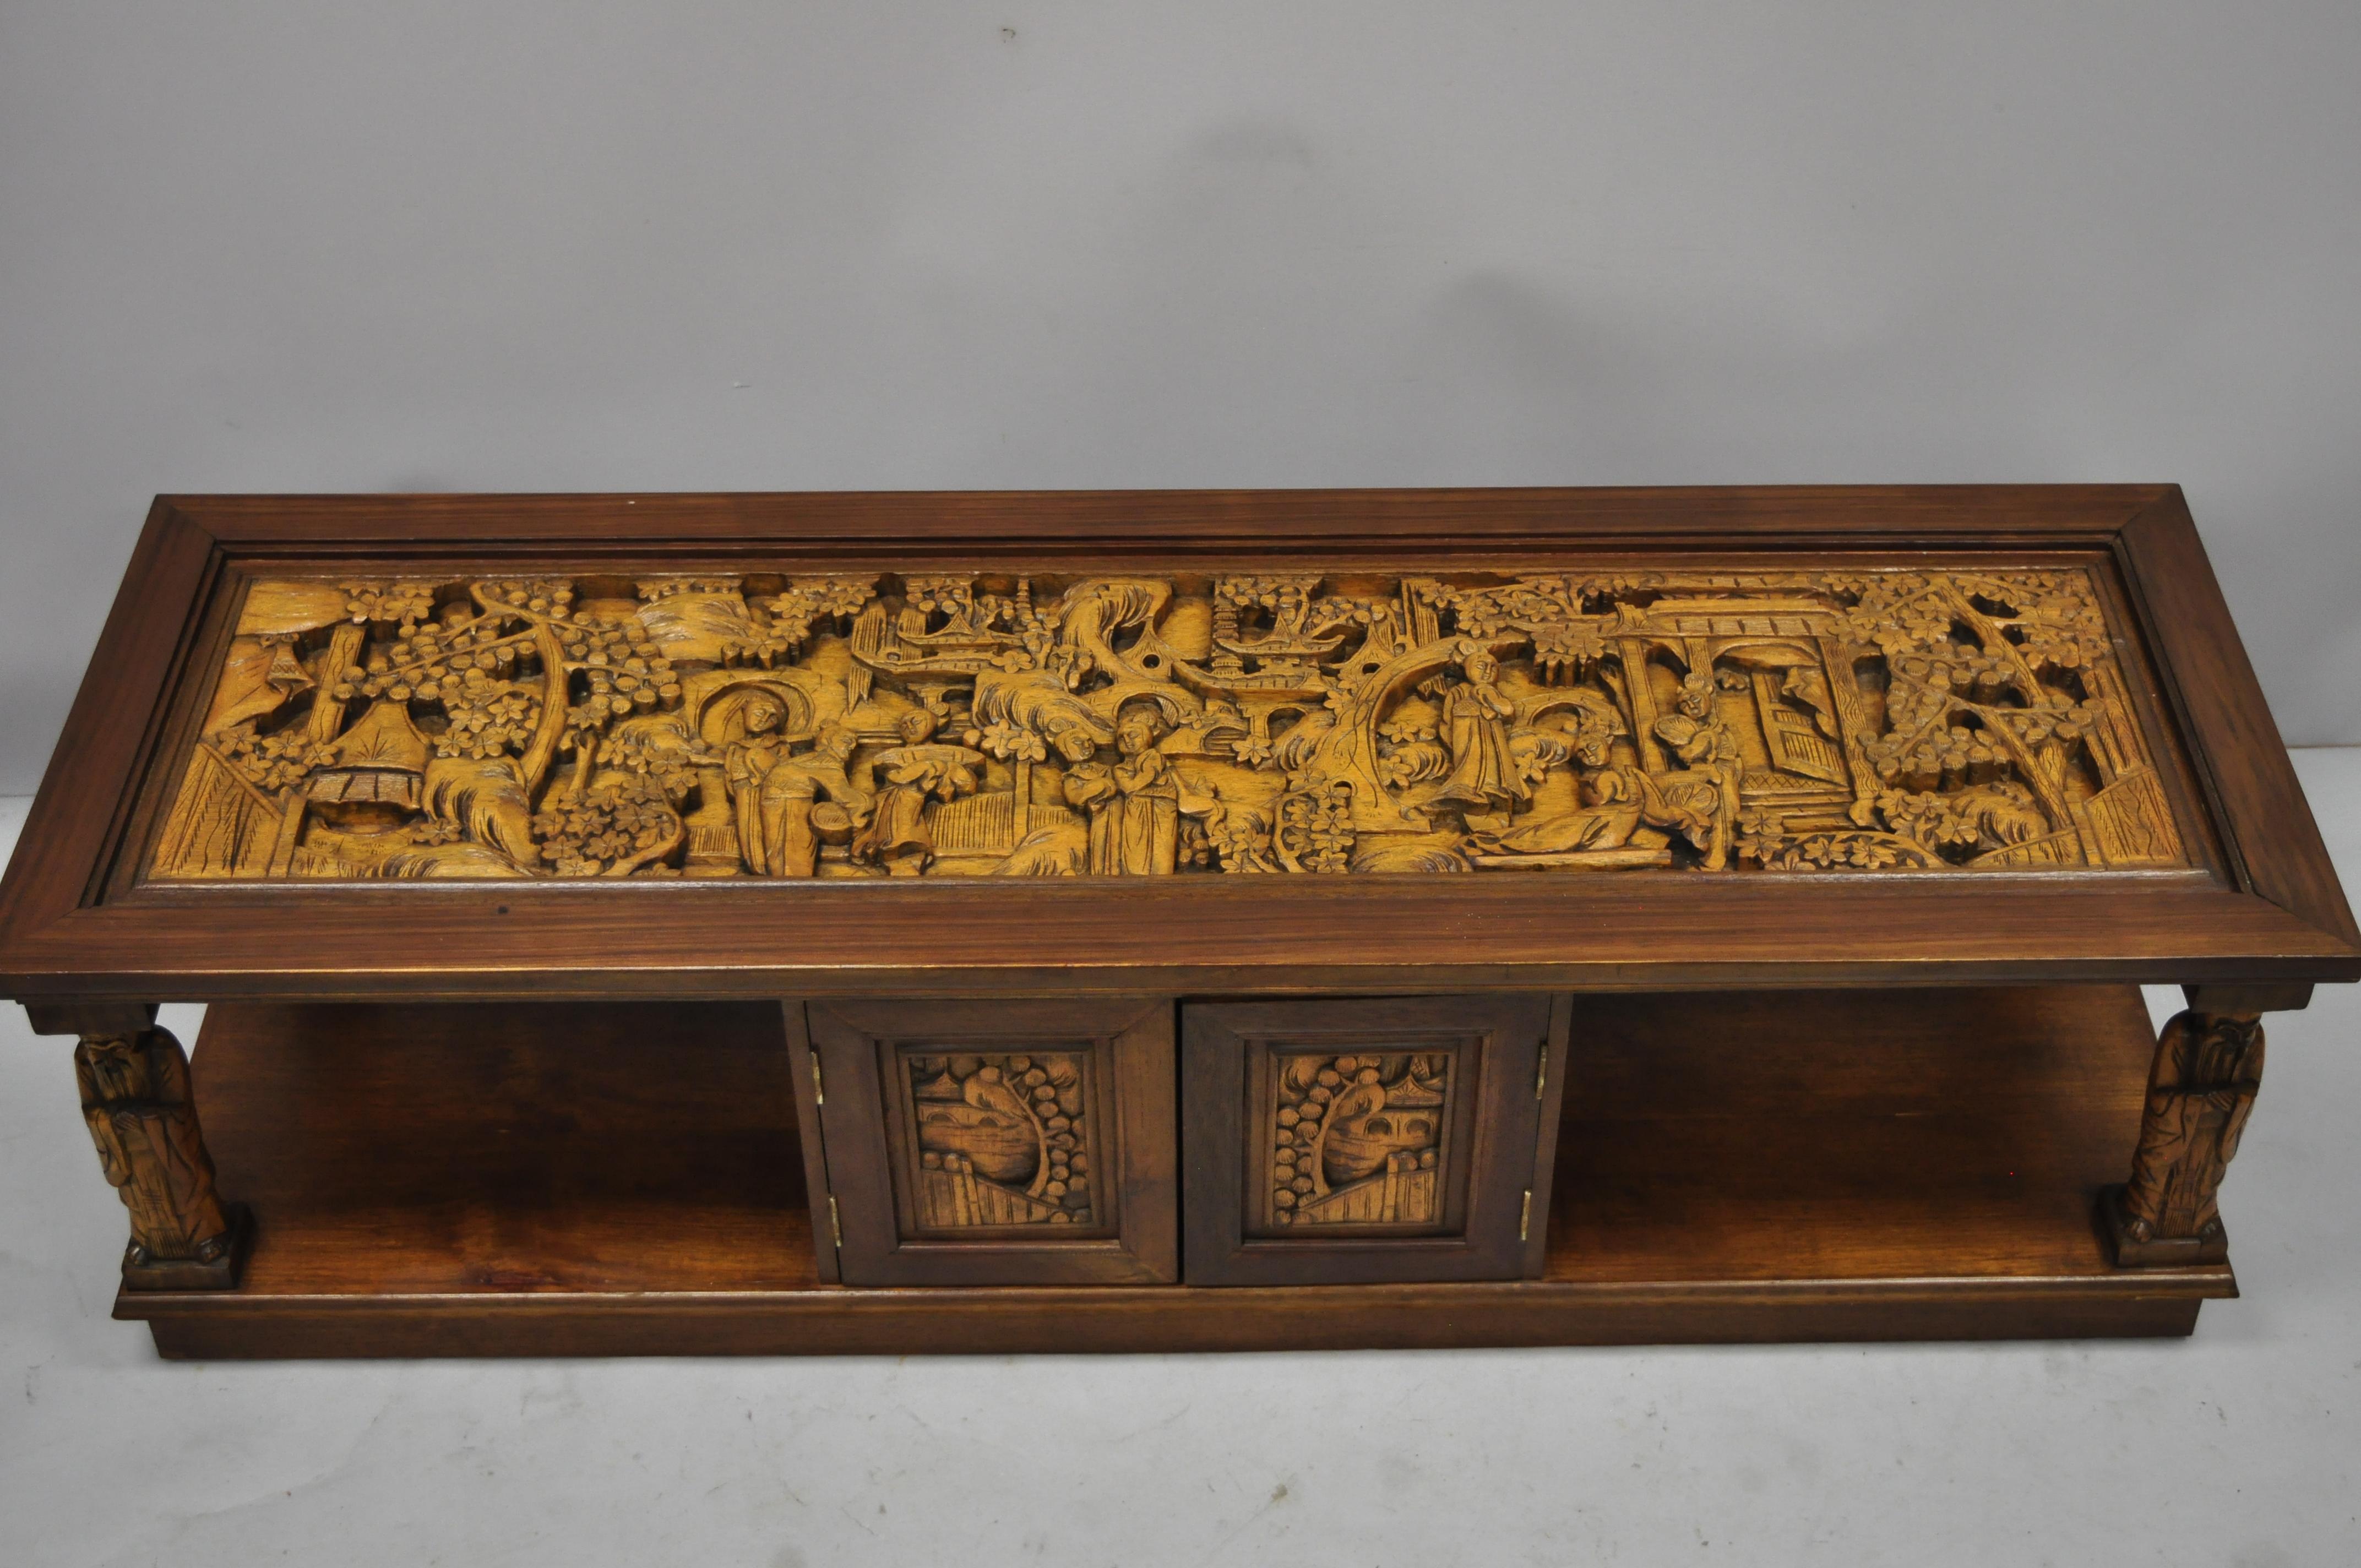 Vintage oriental Asian figural carved coffee table cabinet. Item features ornately carved figural top, cabinet doors on both sides which opens through, carved wood Wiseman column supports, glass top, very rare and unique coffee table, circa mid-20th